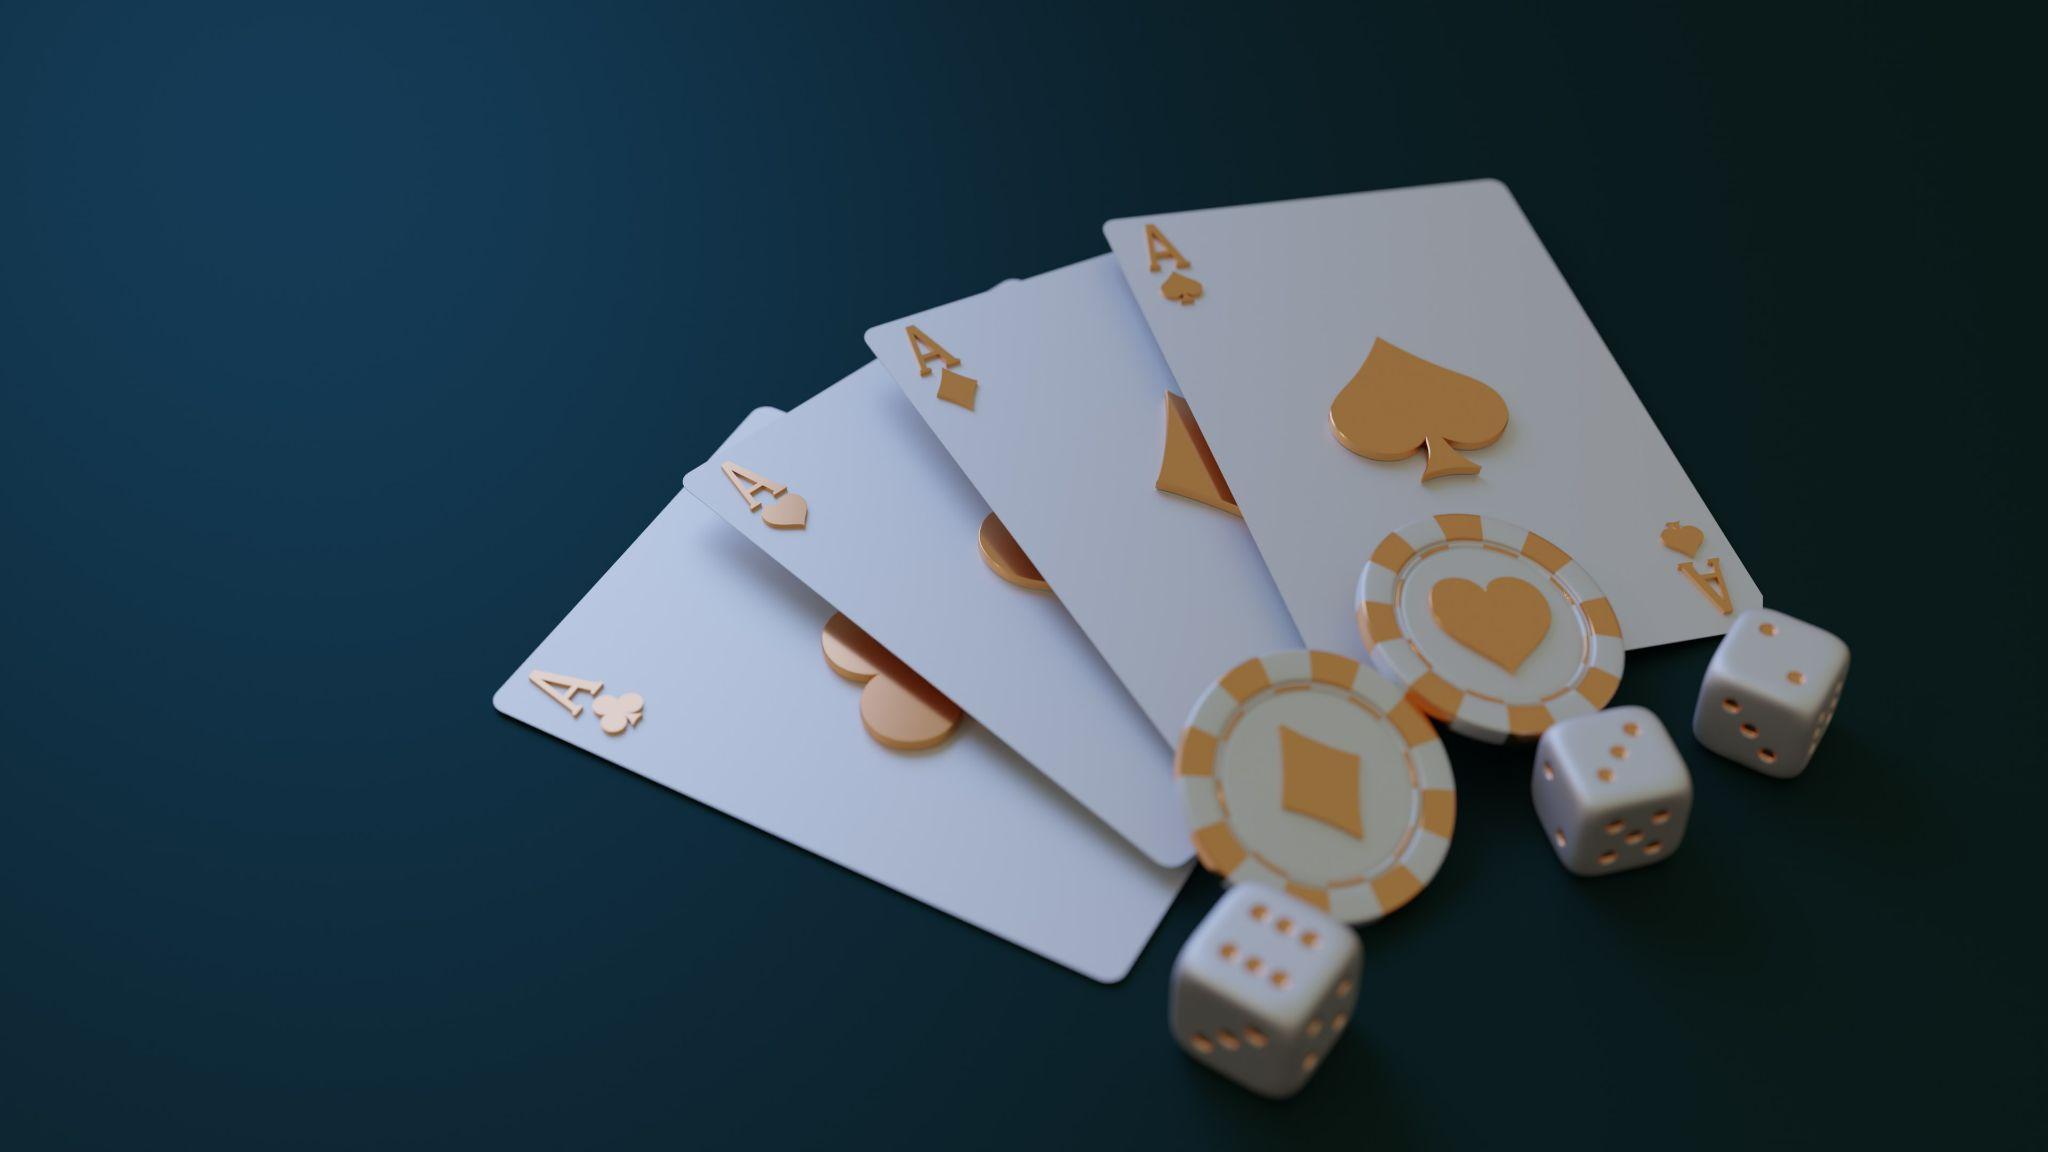 Most Attractive Design For Your Gambling Site